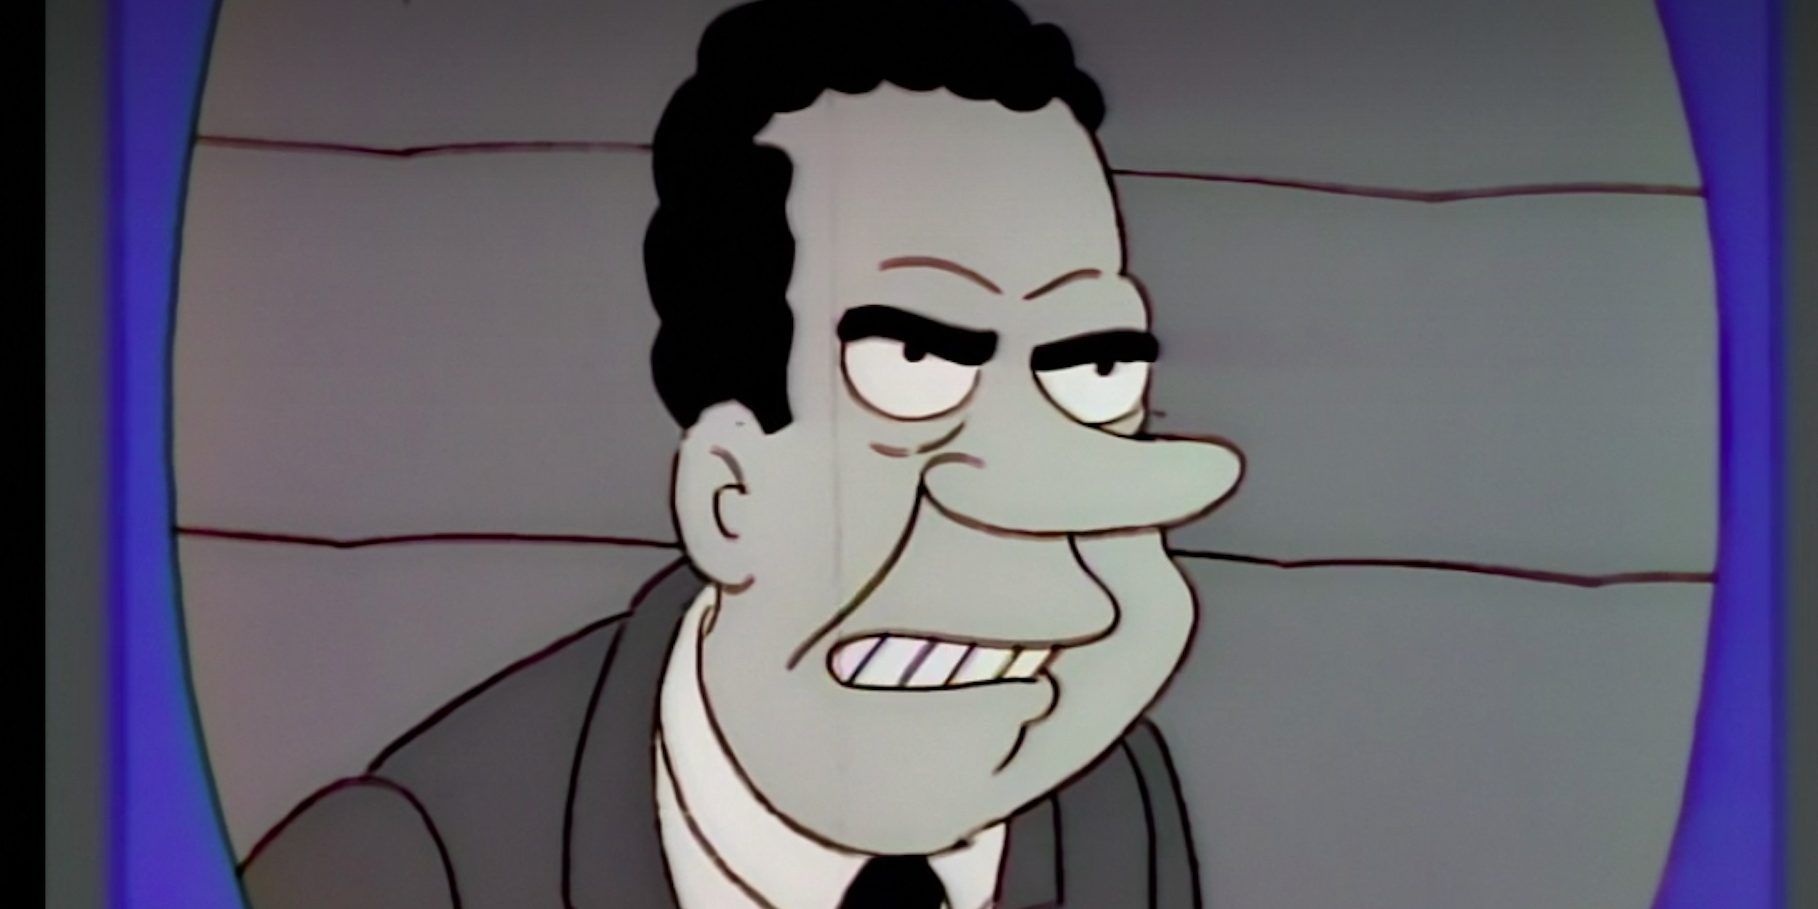 Every US President Who Appeared On The Simpsons